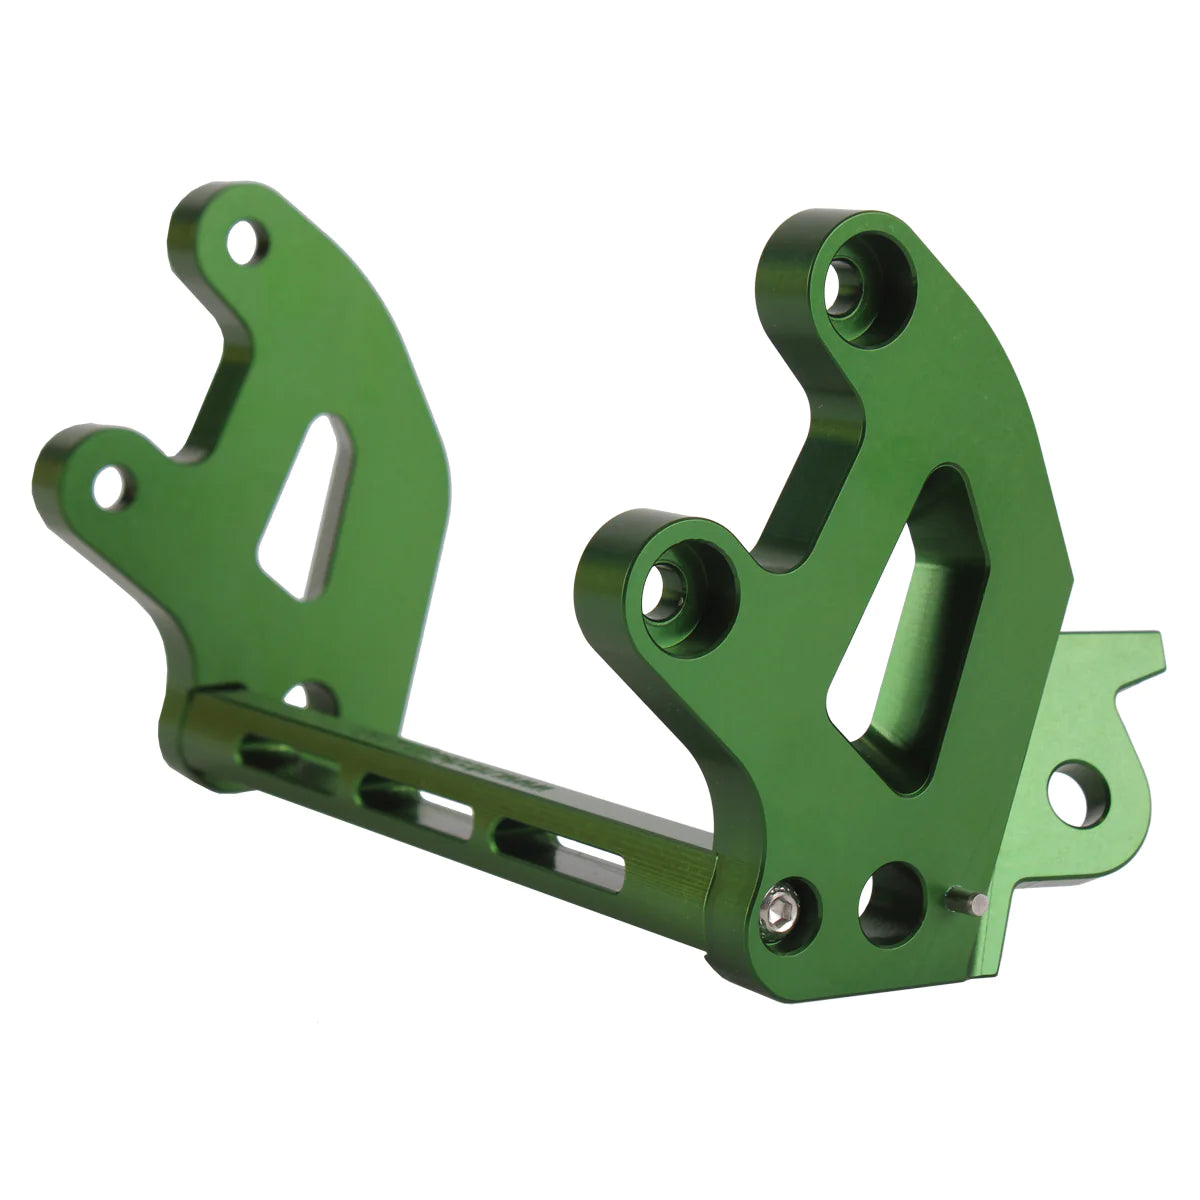 Lowering Peg Bracket Set With Kickstand Option and Support Brace SurRonshop